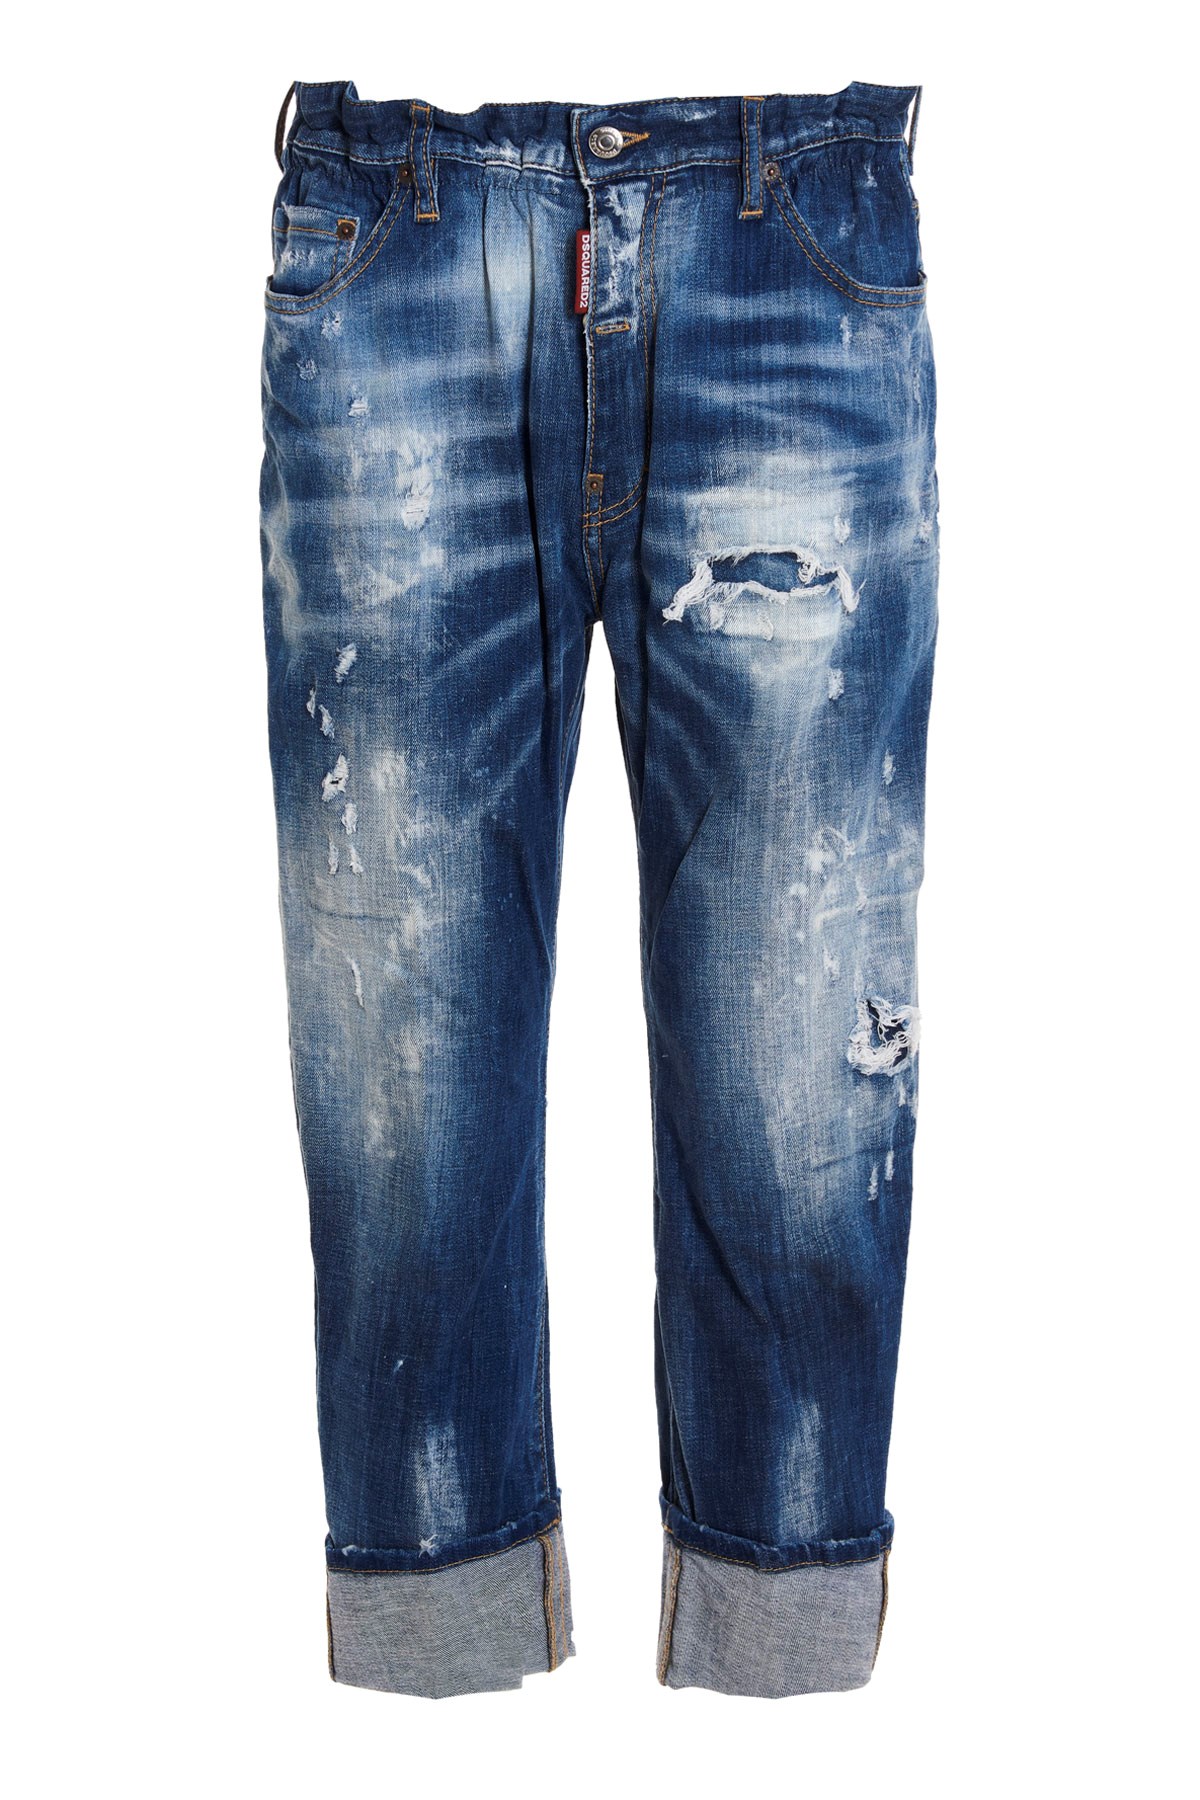 DSQUARED2 'Big Dean's Brother’ Jeans